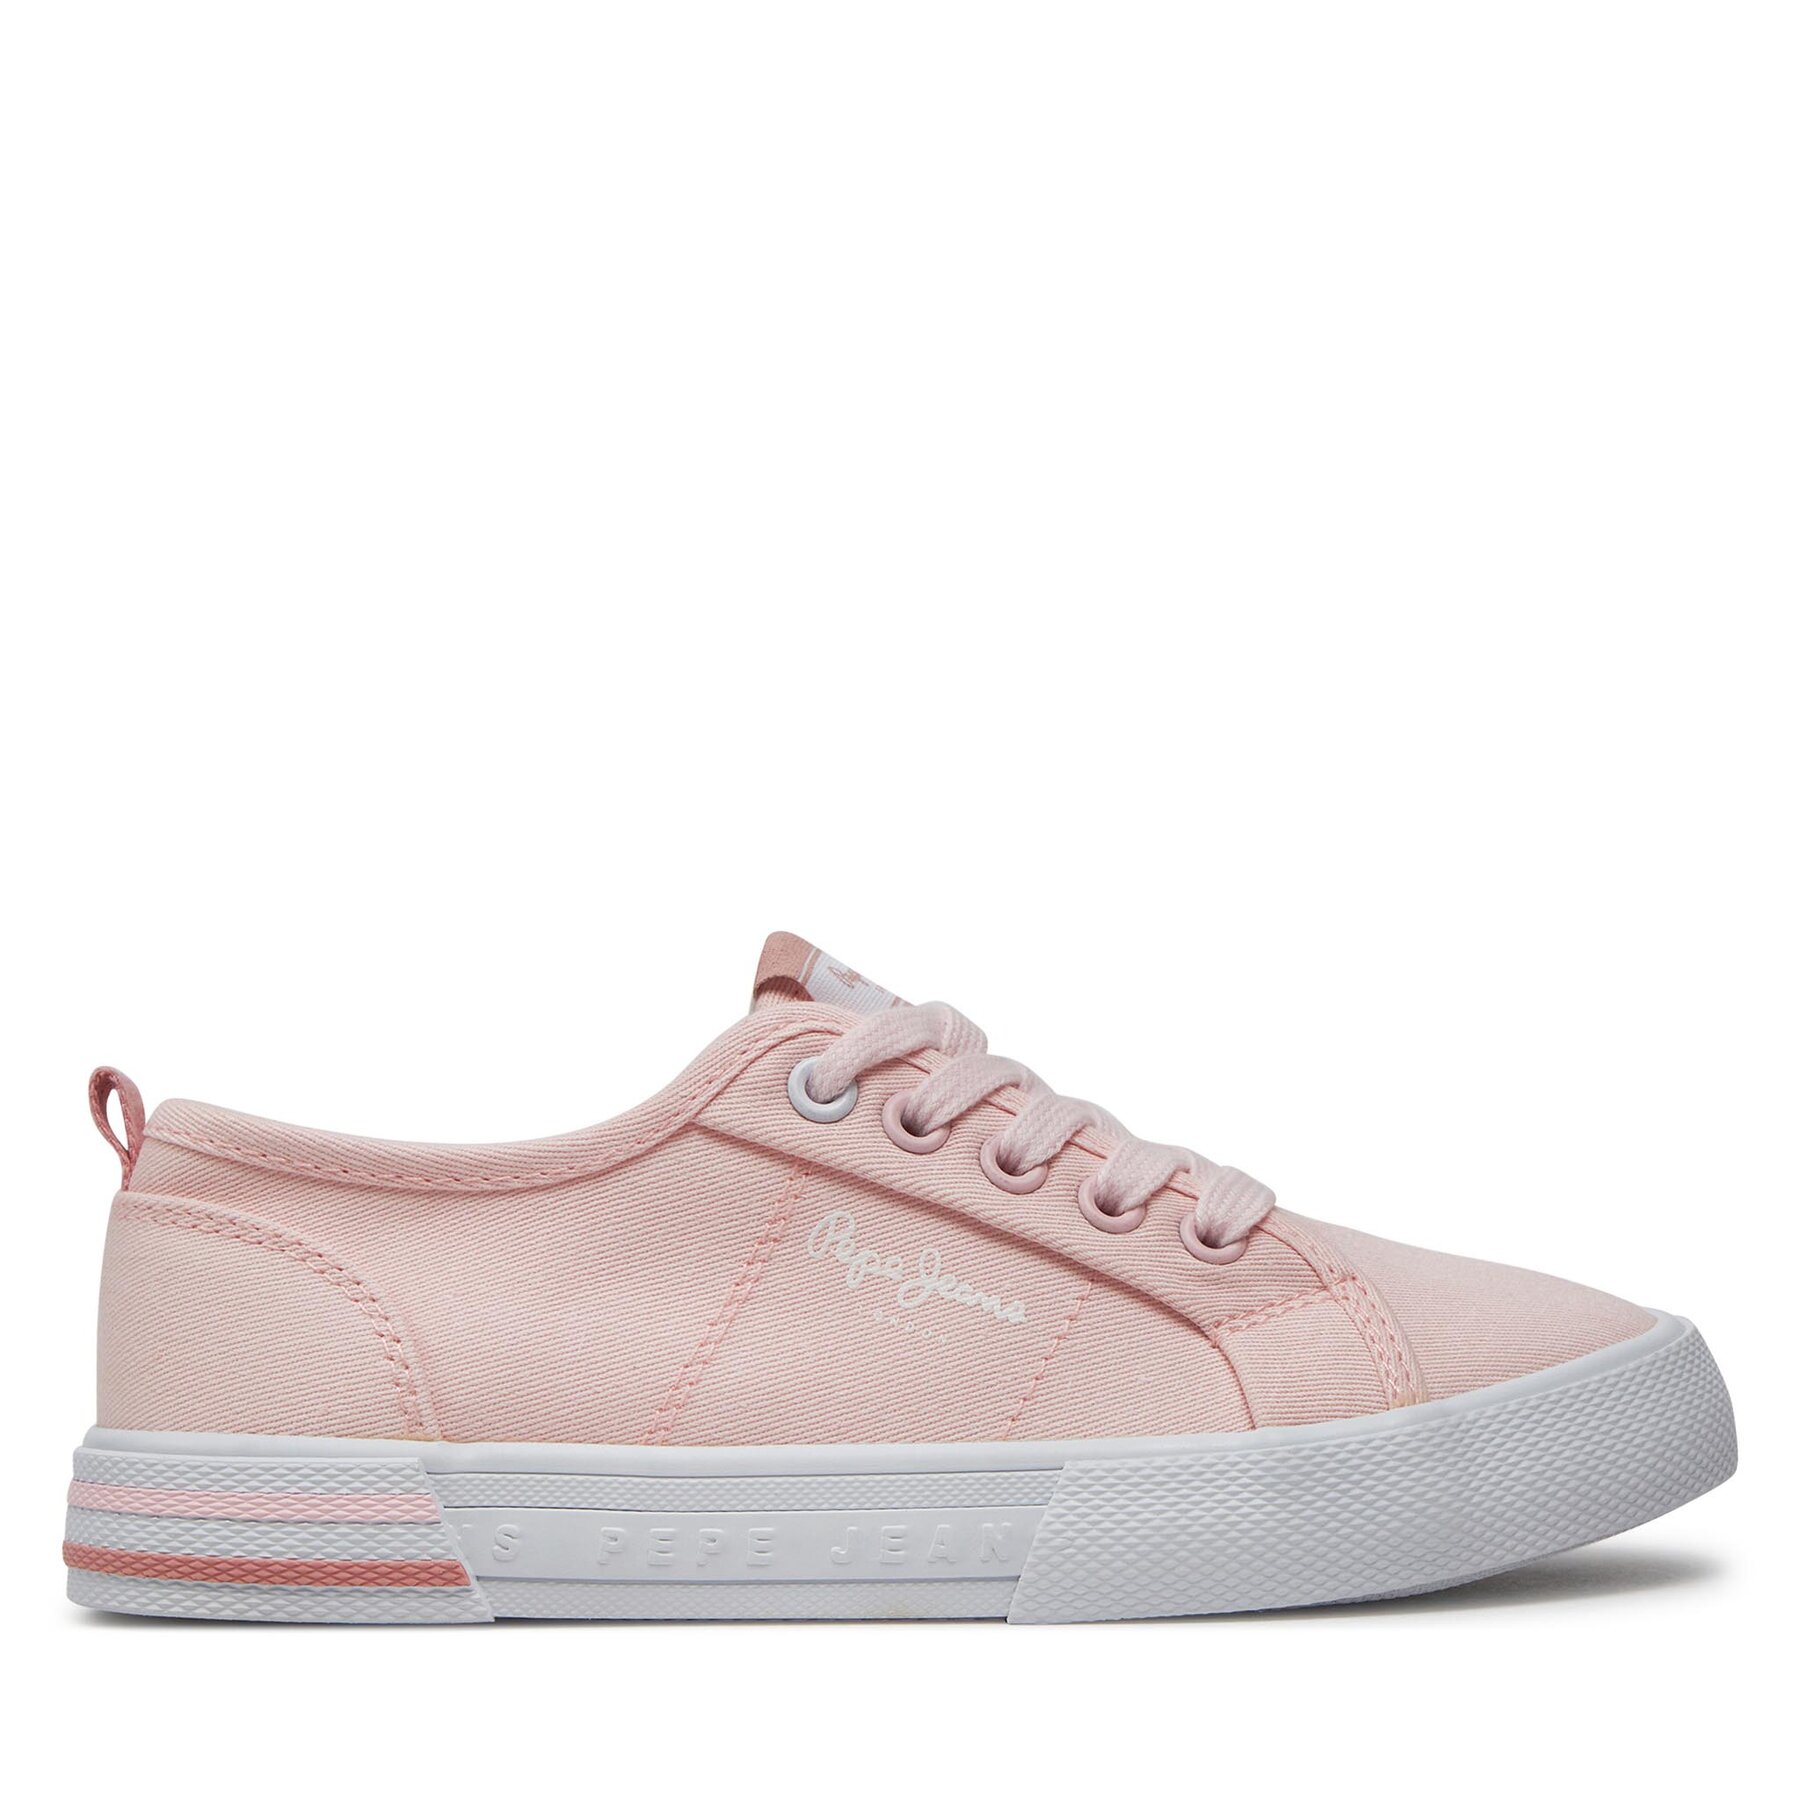 Sneakers aus Stoff Pepe Jeans Brady Basic G PGS30604 Pink 325 von Pepe Jeans